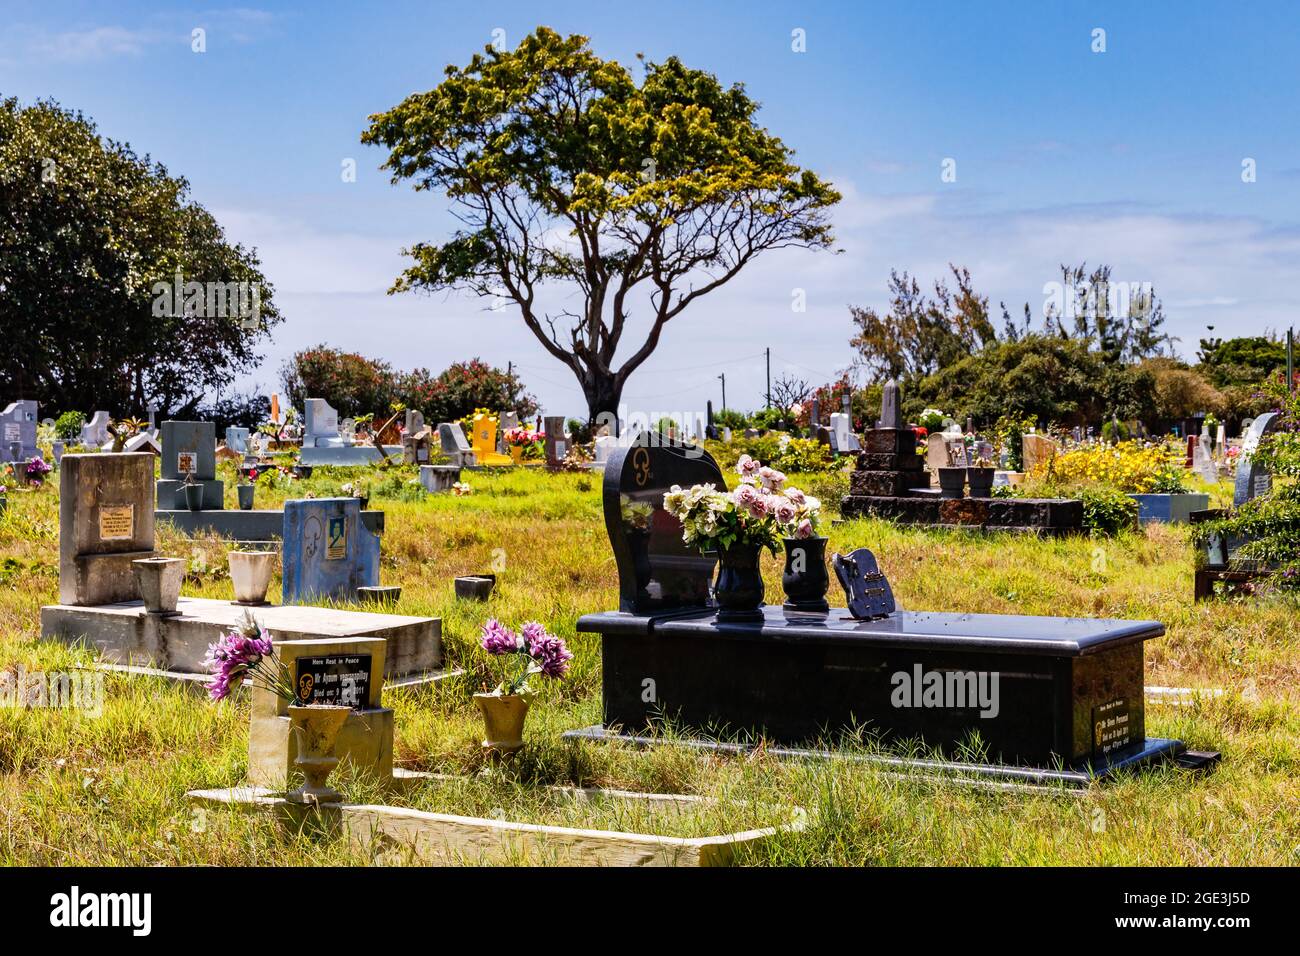 A colorful and sun-drenched multi-religious cemetery on the island of Mauritius in the Indian Ocean Stock Photo